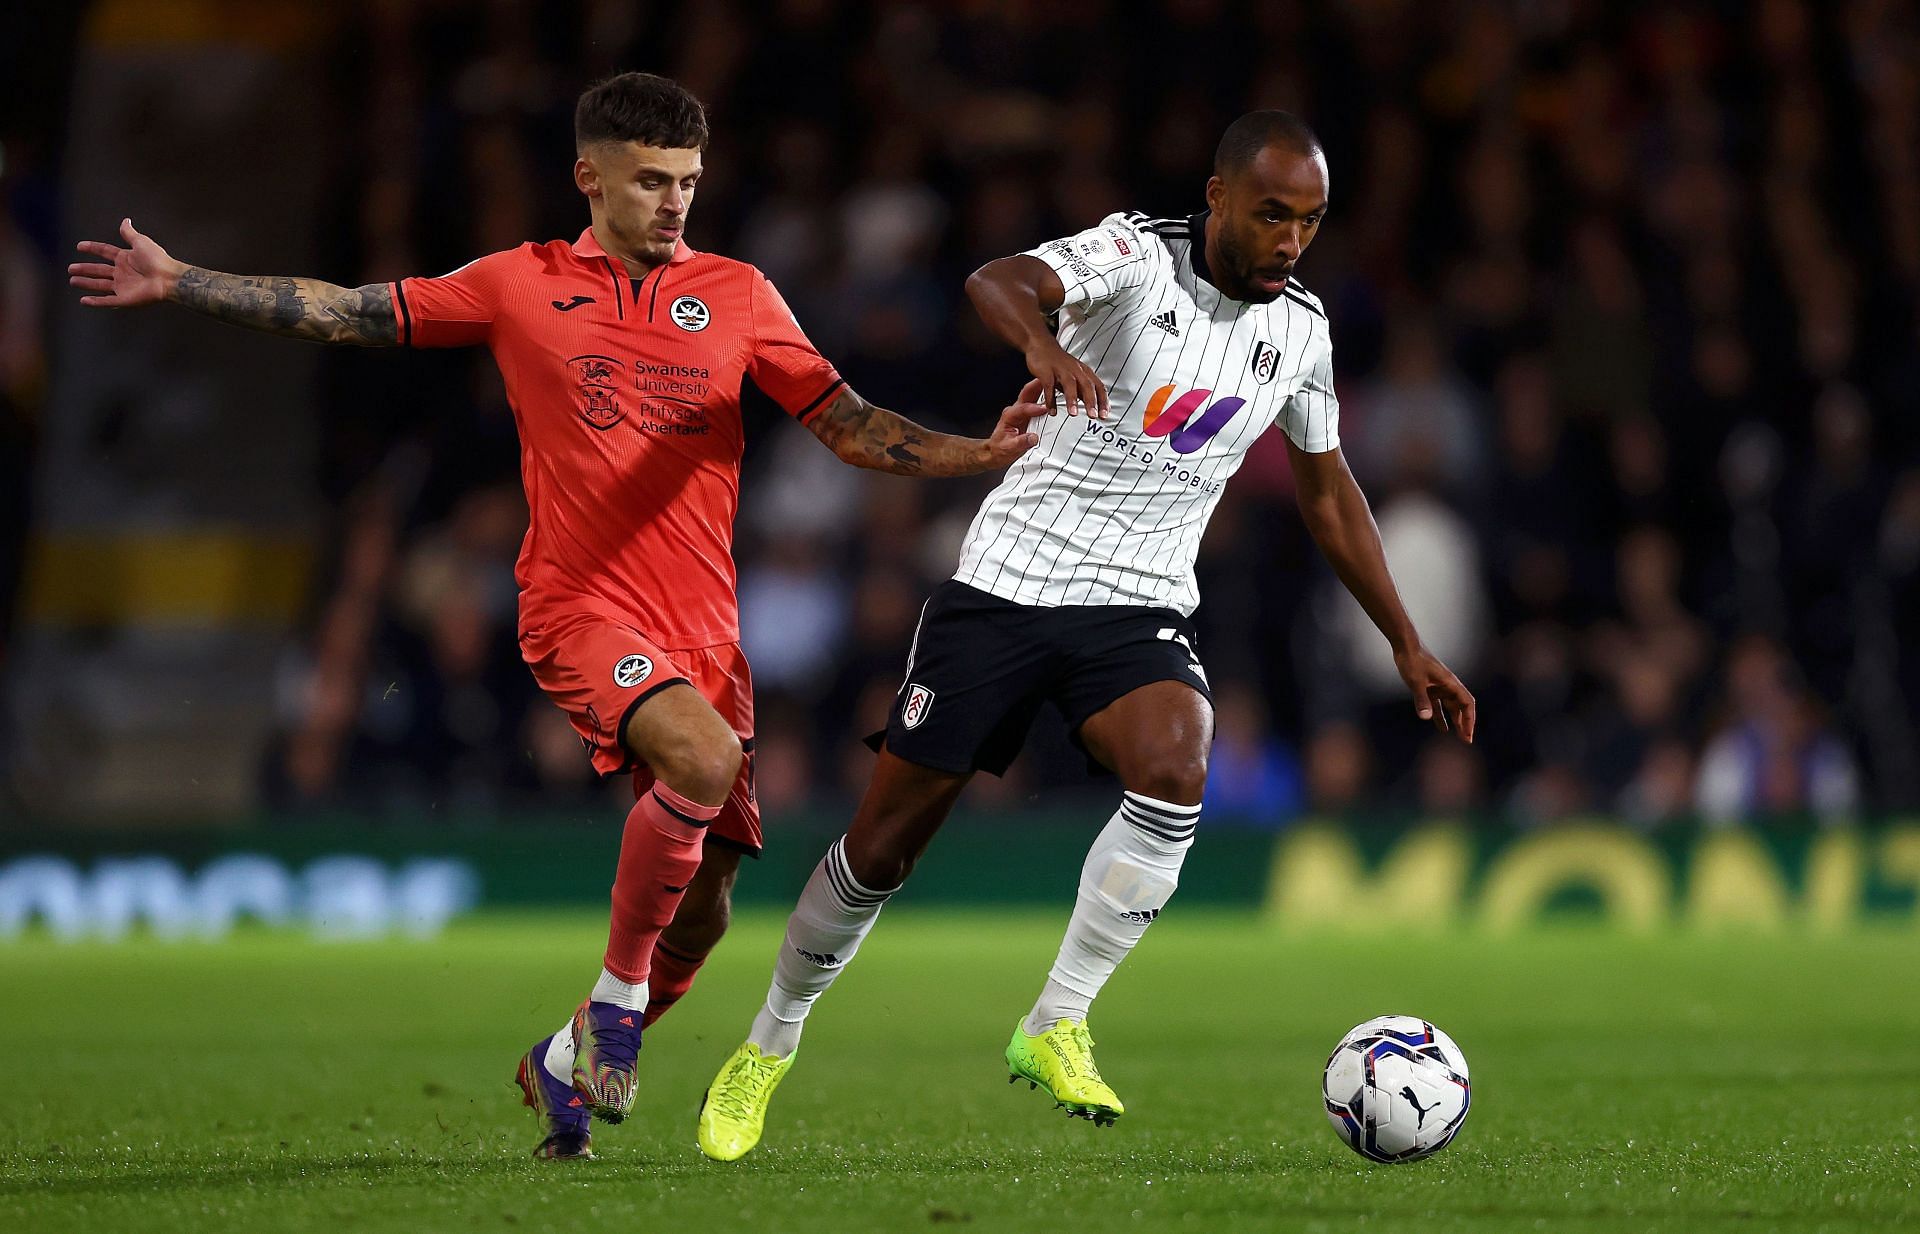 Fulham face Swansea City on Tuesday